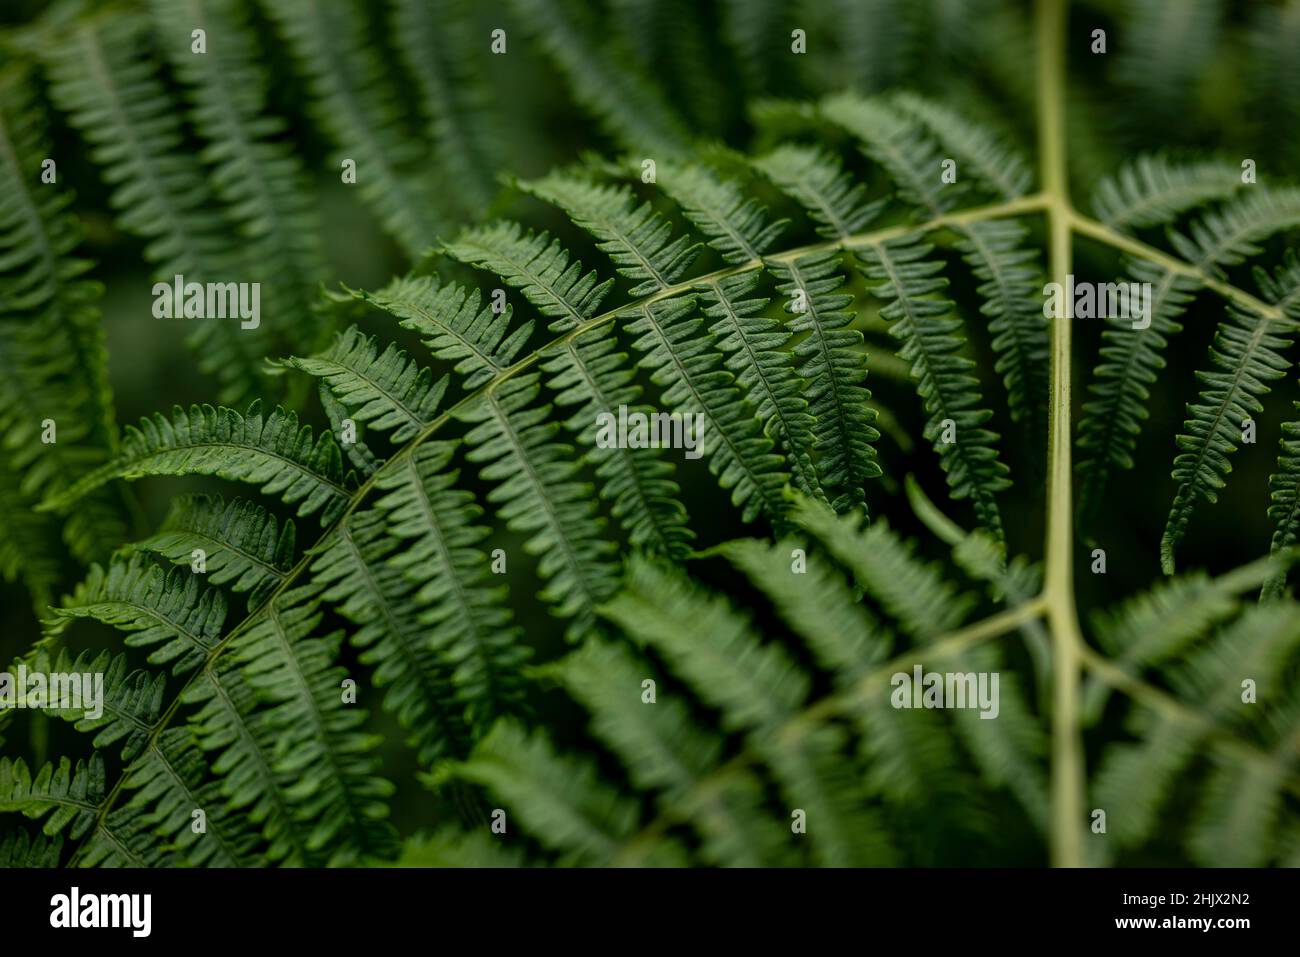 Close up of fresh green common lady fern (Athyrium filix-femina), suitable as an abstract background for themes related to nature and sustainability Stock Photo